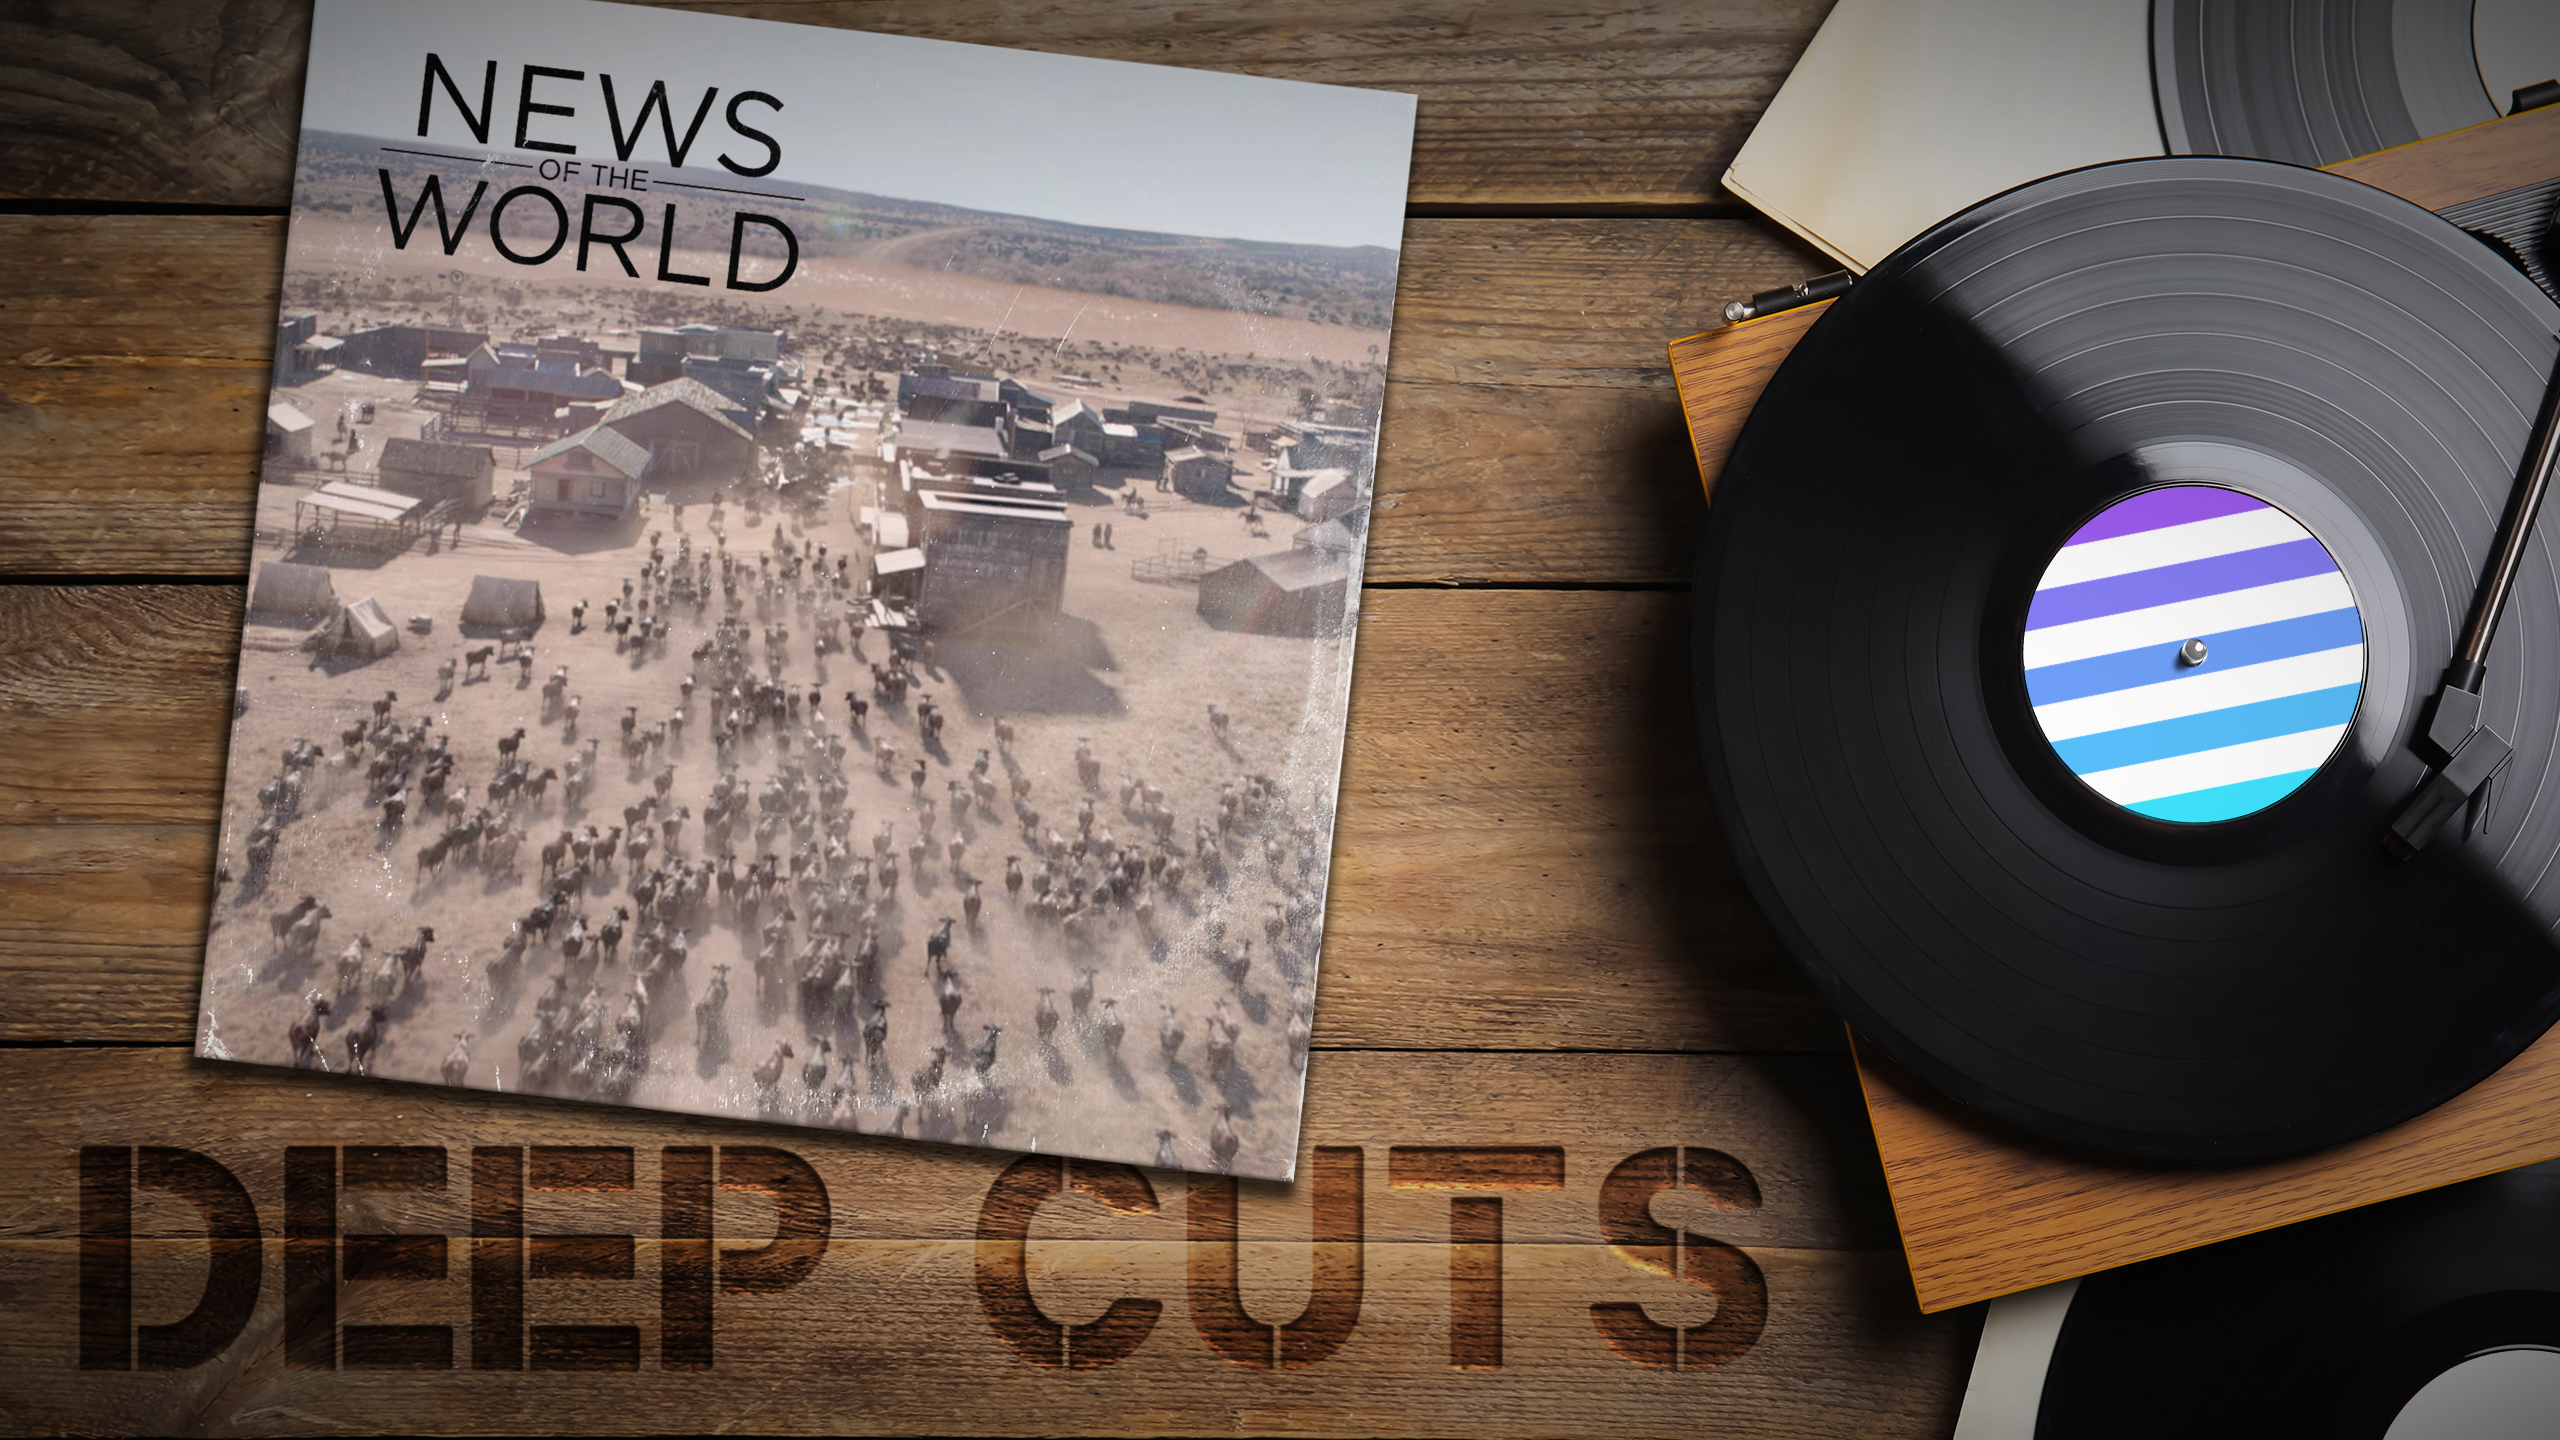 Deep Cuts: From cow-spotting to Covid - how Outpost created News of the World’s Red River